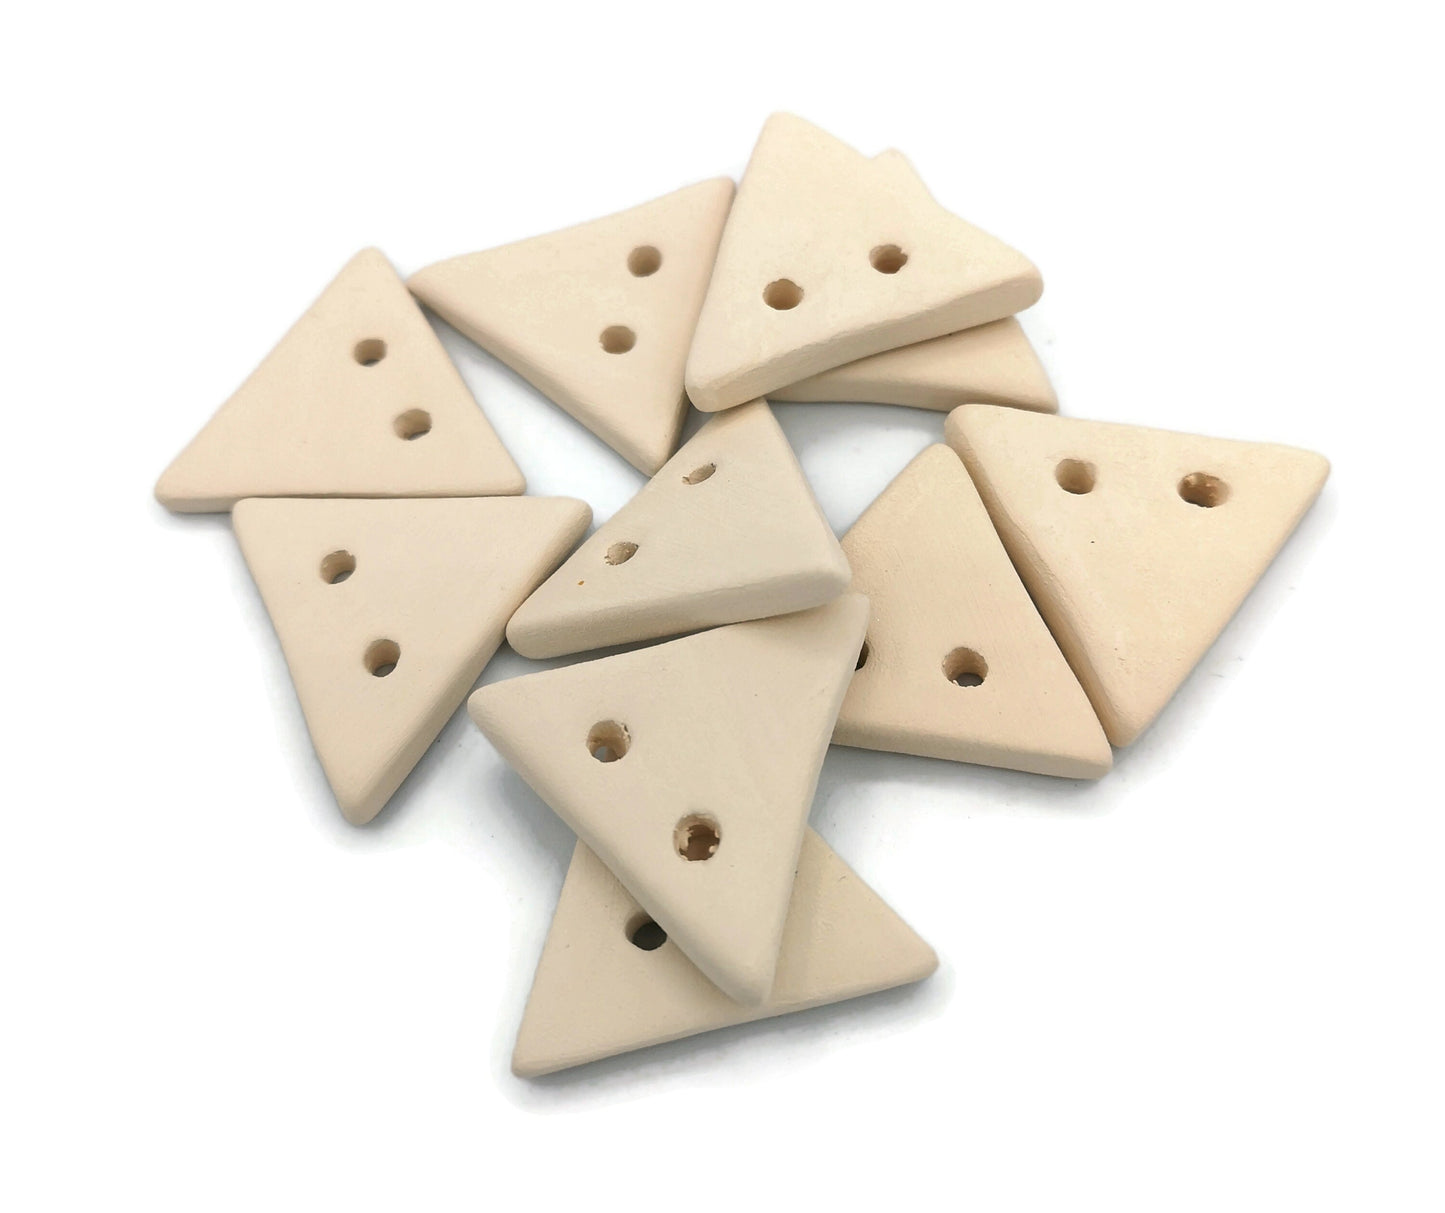 BLANK BUTTONS, TRIANGLE Sewing Buttons For Jewery Making, Set Of 10 Unpainted Ceramic Bisque Ready To Paint, Novelty Buttons, Flat Buttons - Ceramica Ana Rafael